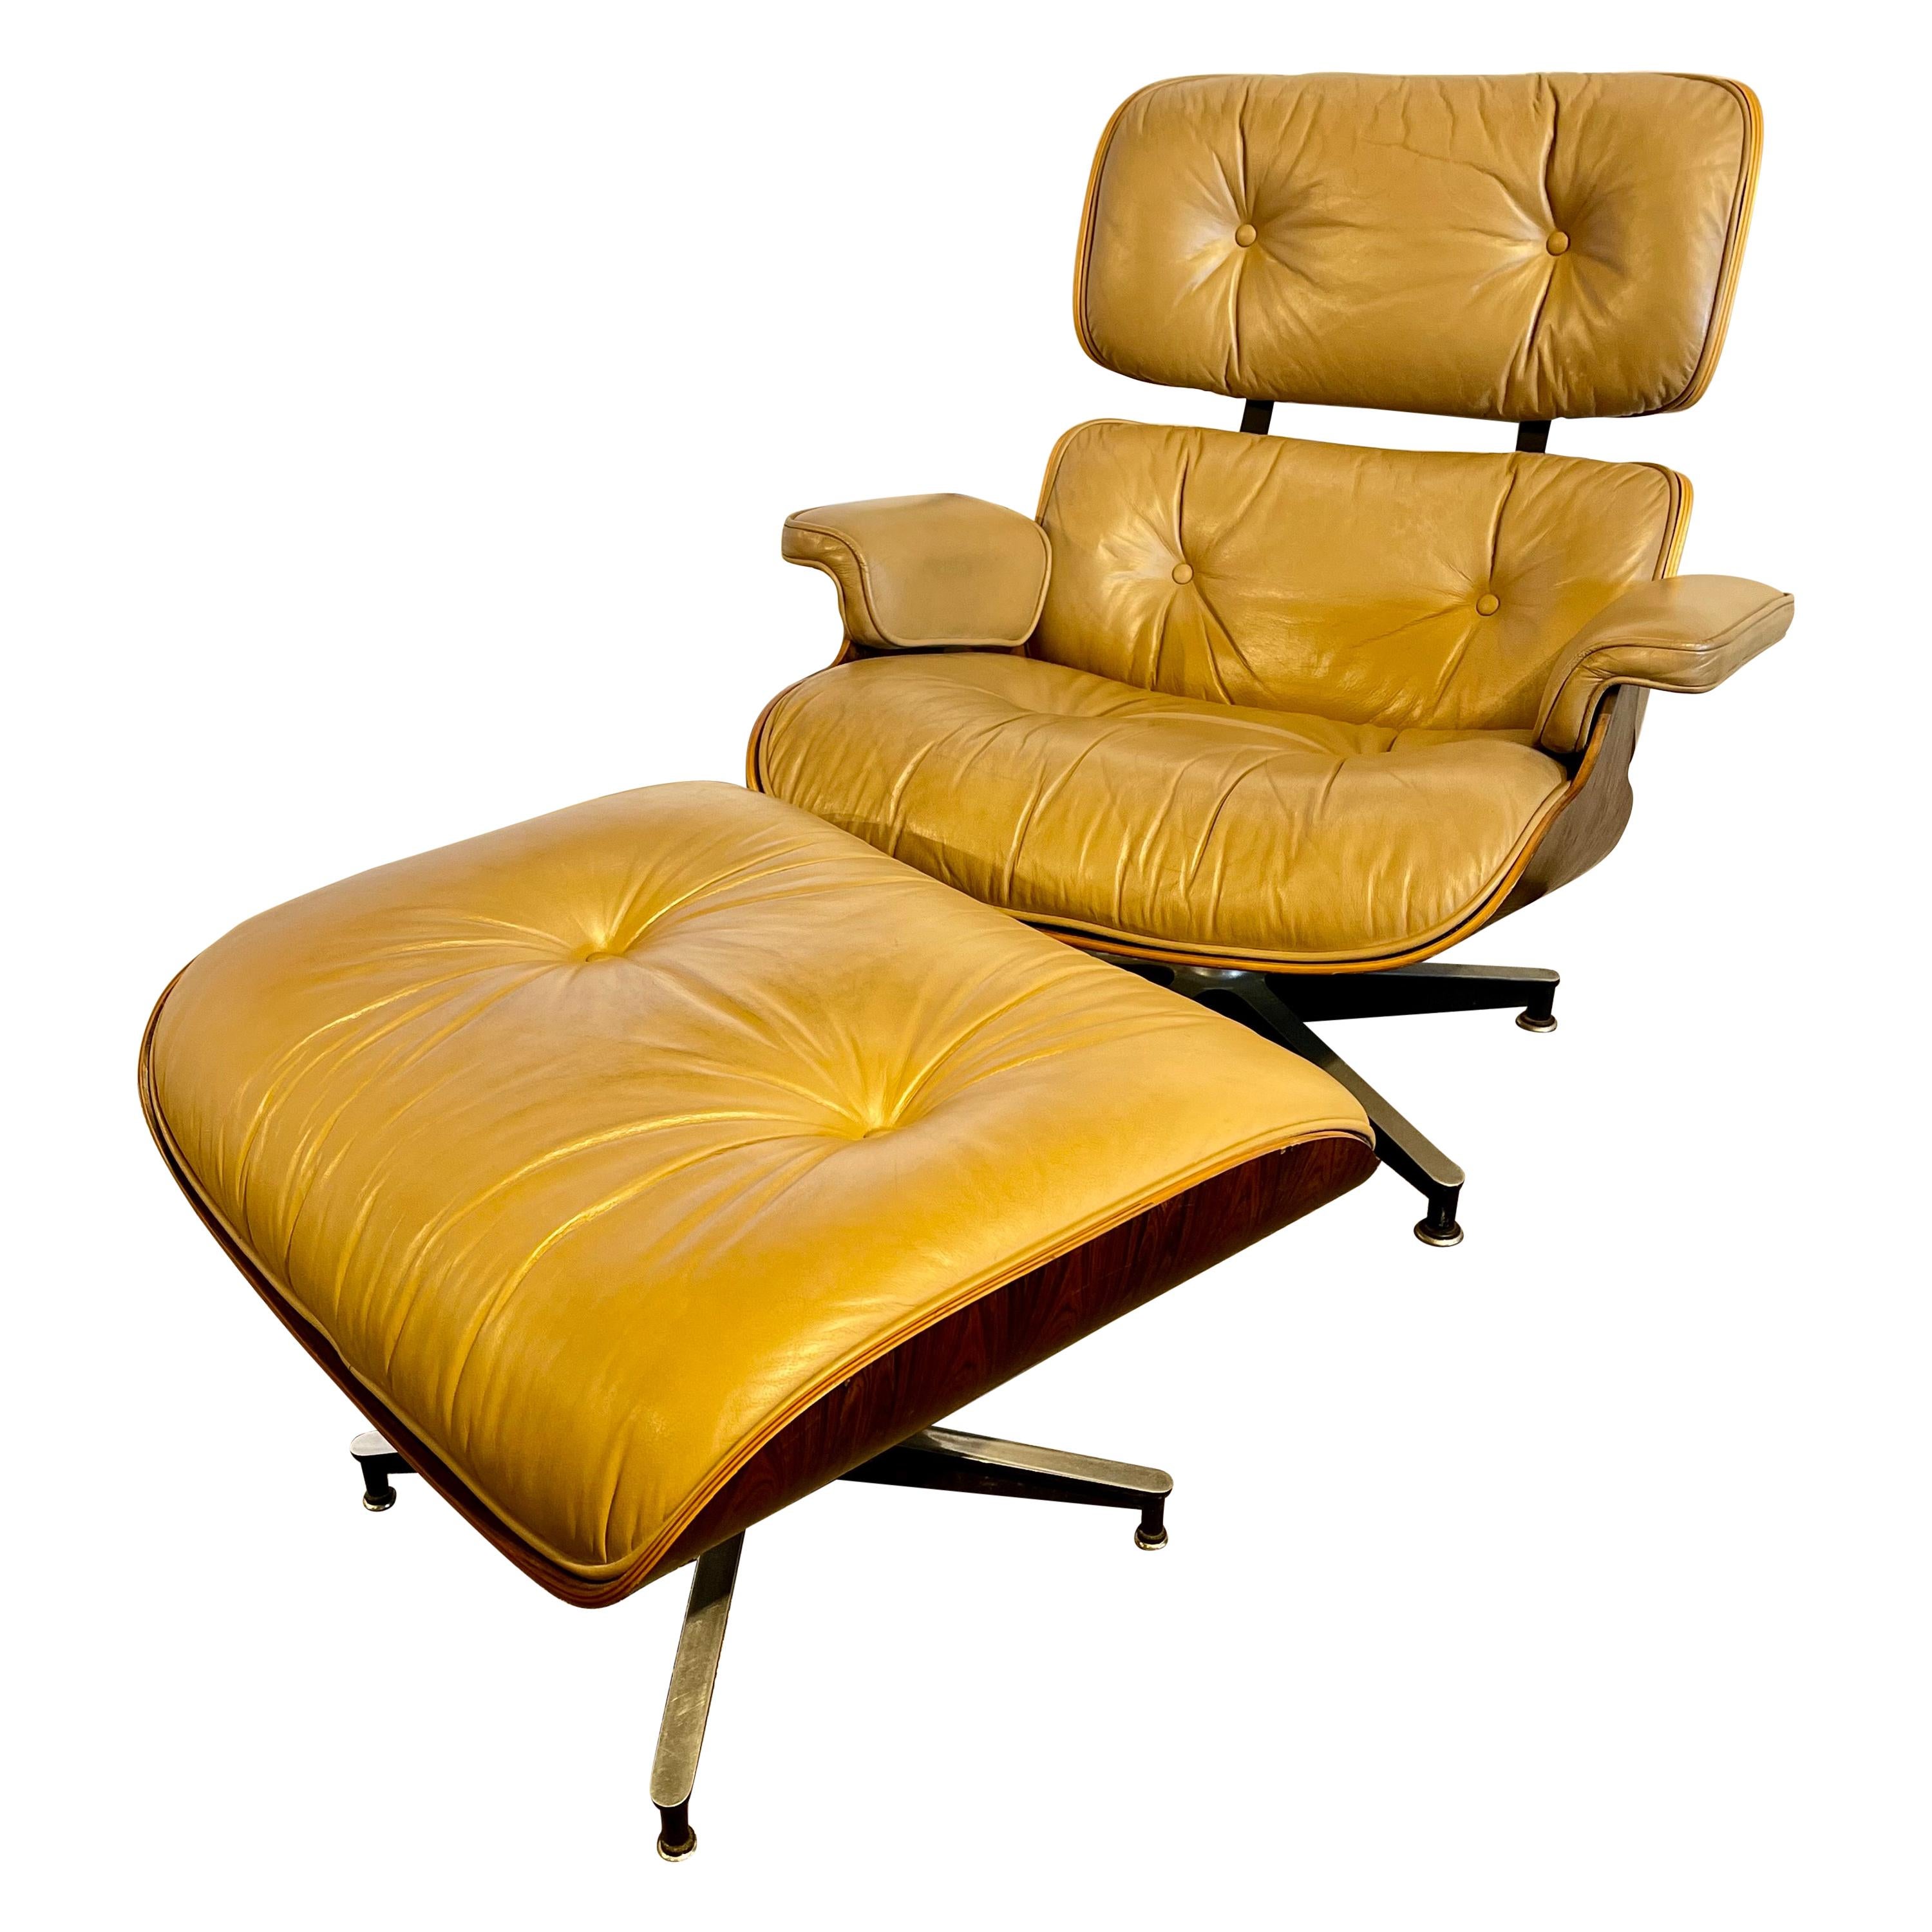 Charles Eames, Herman Miller Midcentury Chair and Ottoman